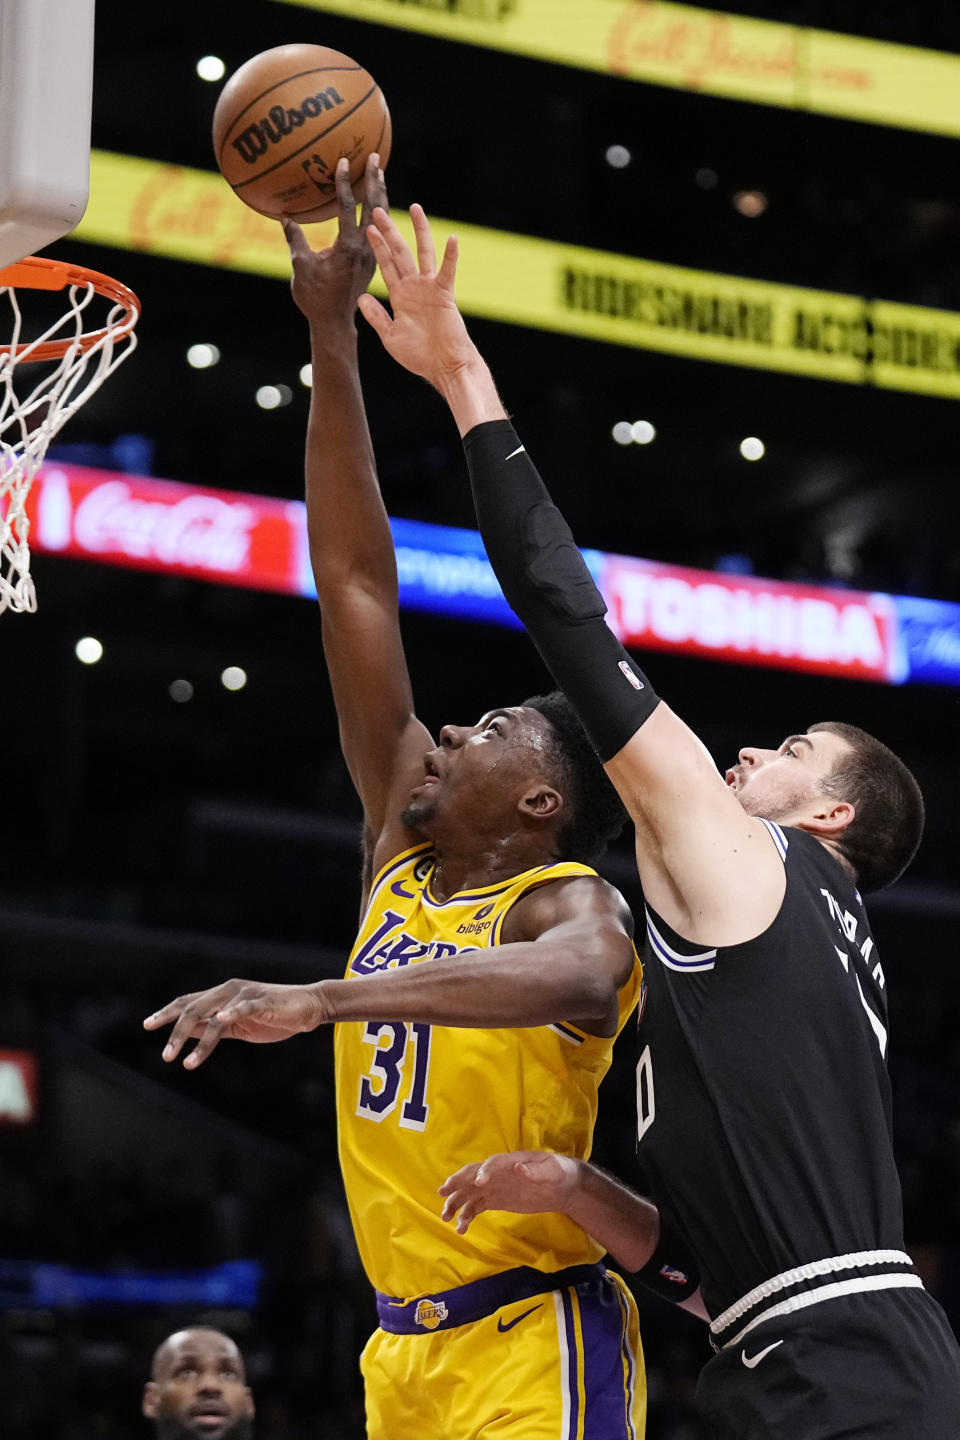 Los Angeles Lakers center Thomas Bryant, left, and Los Angeles Clippers center Ivica Zubac go after a rebound during the first half of an NBA basketball game Tuesday, Jan. 24, 2023, in Los Angeles. (AP Photo/Mark J. Terrill)